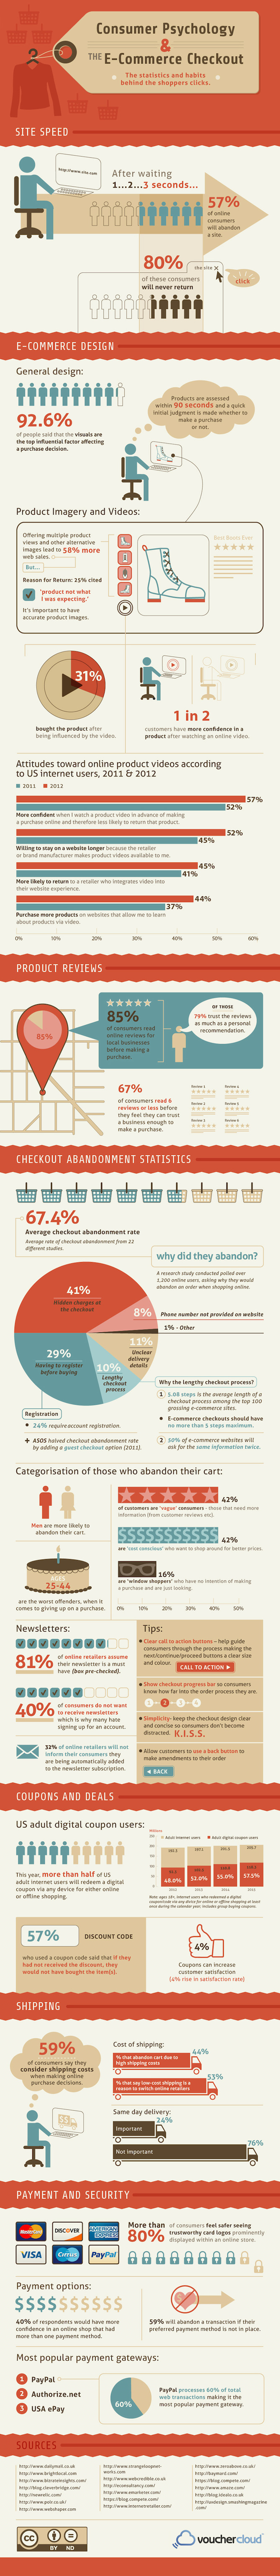 Consumer-Psychology-and-ECommerce-Checkouts-Infographic